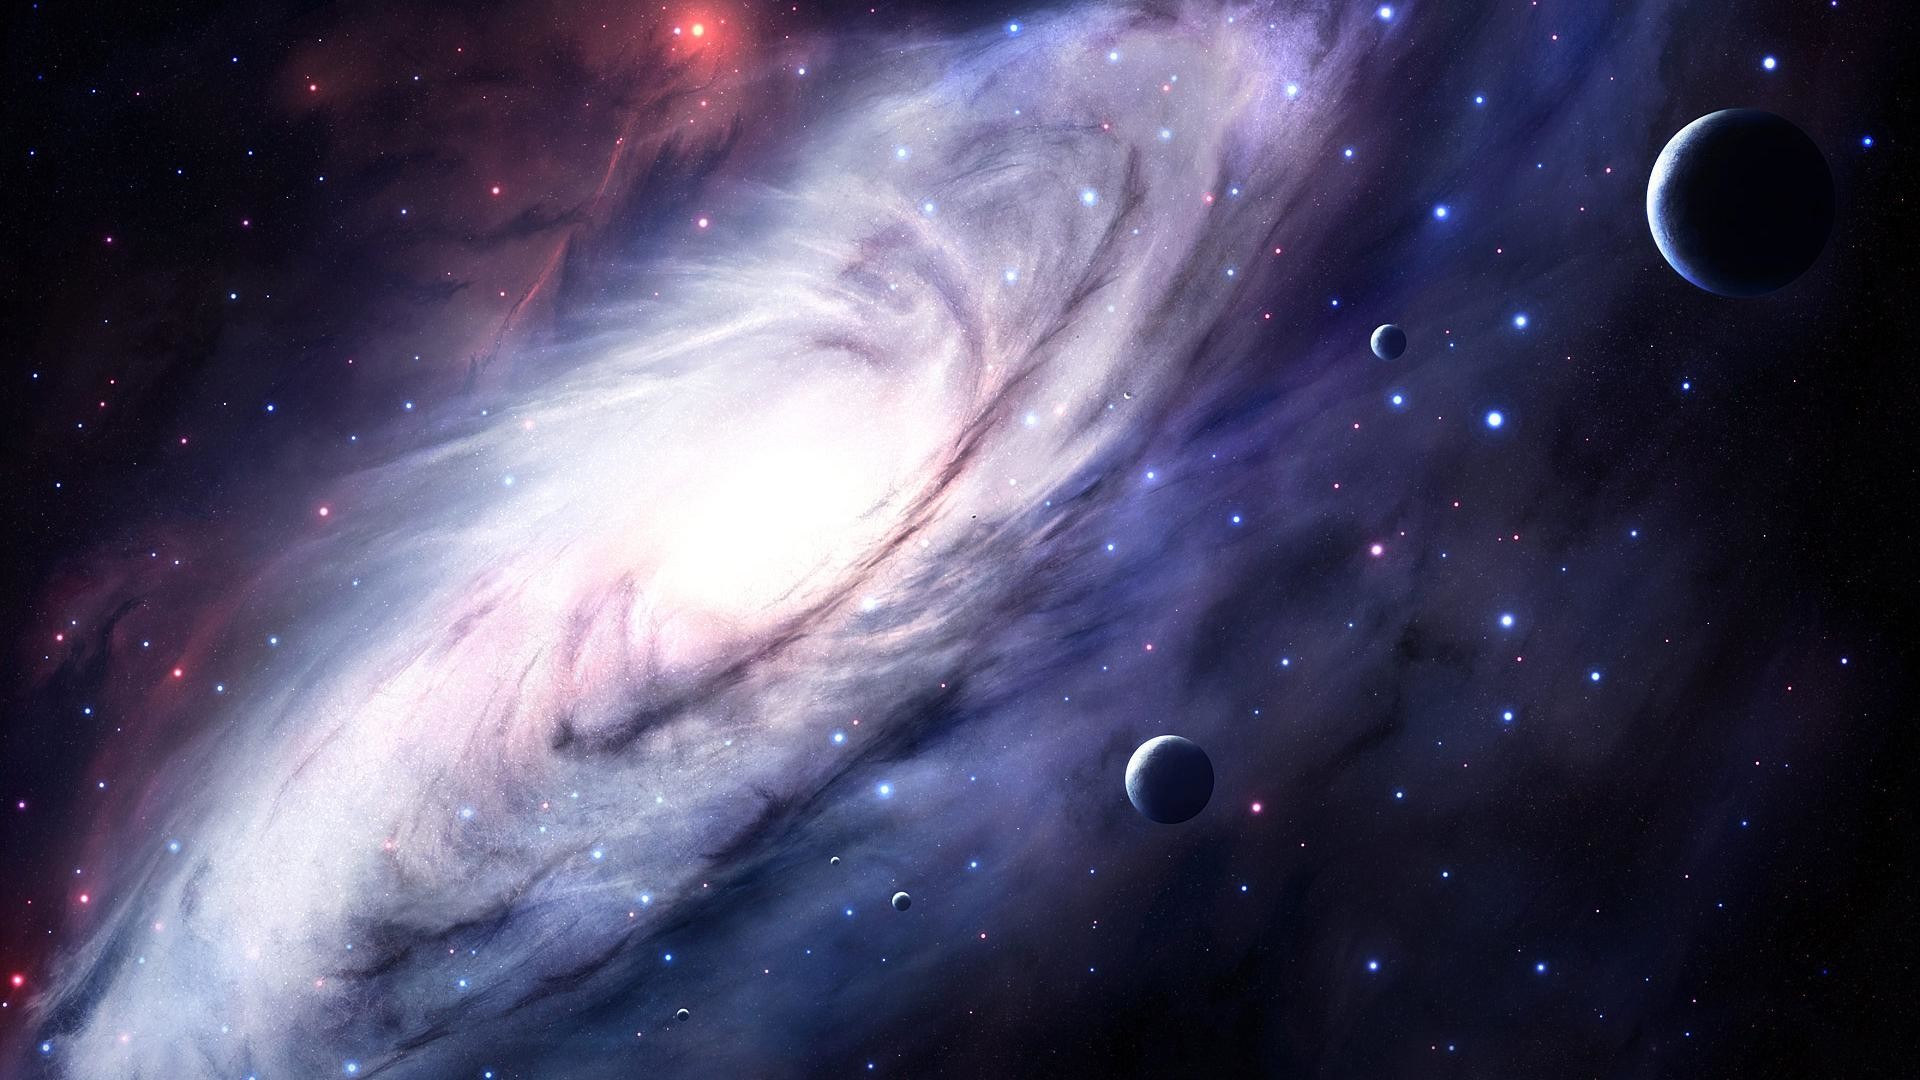 Space wallpaper Out space is a world full of mysteries and unknowns. With the help of Hubble Space Telescope, it makes it possible for man to view the